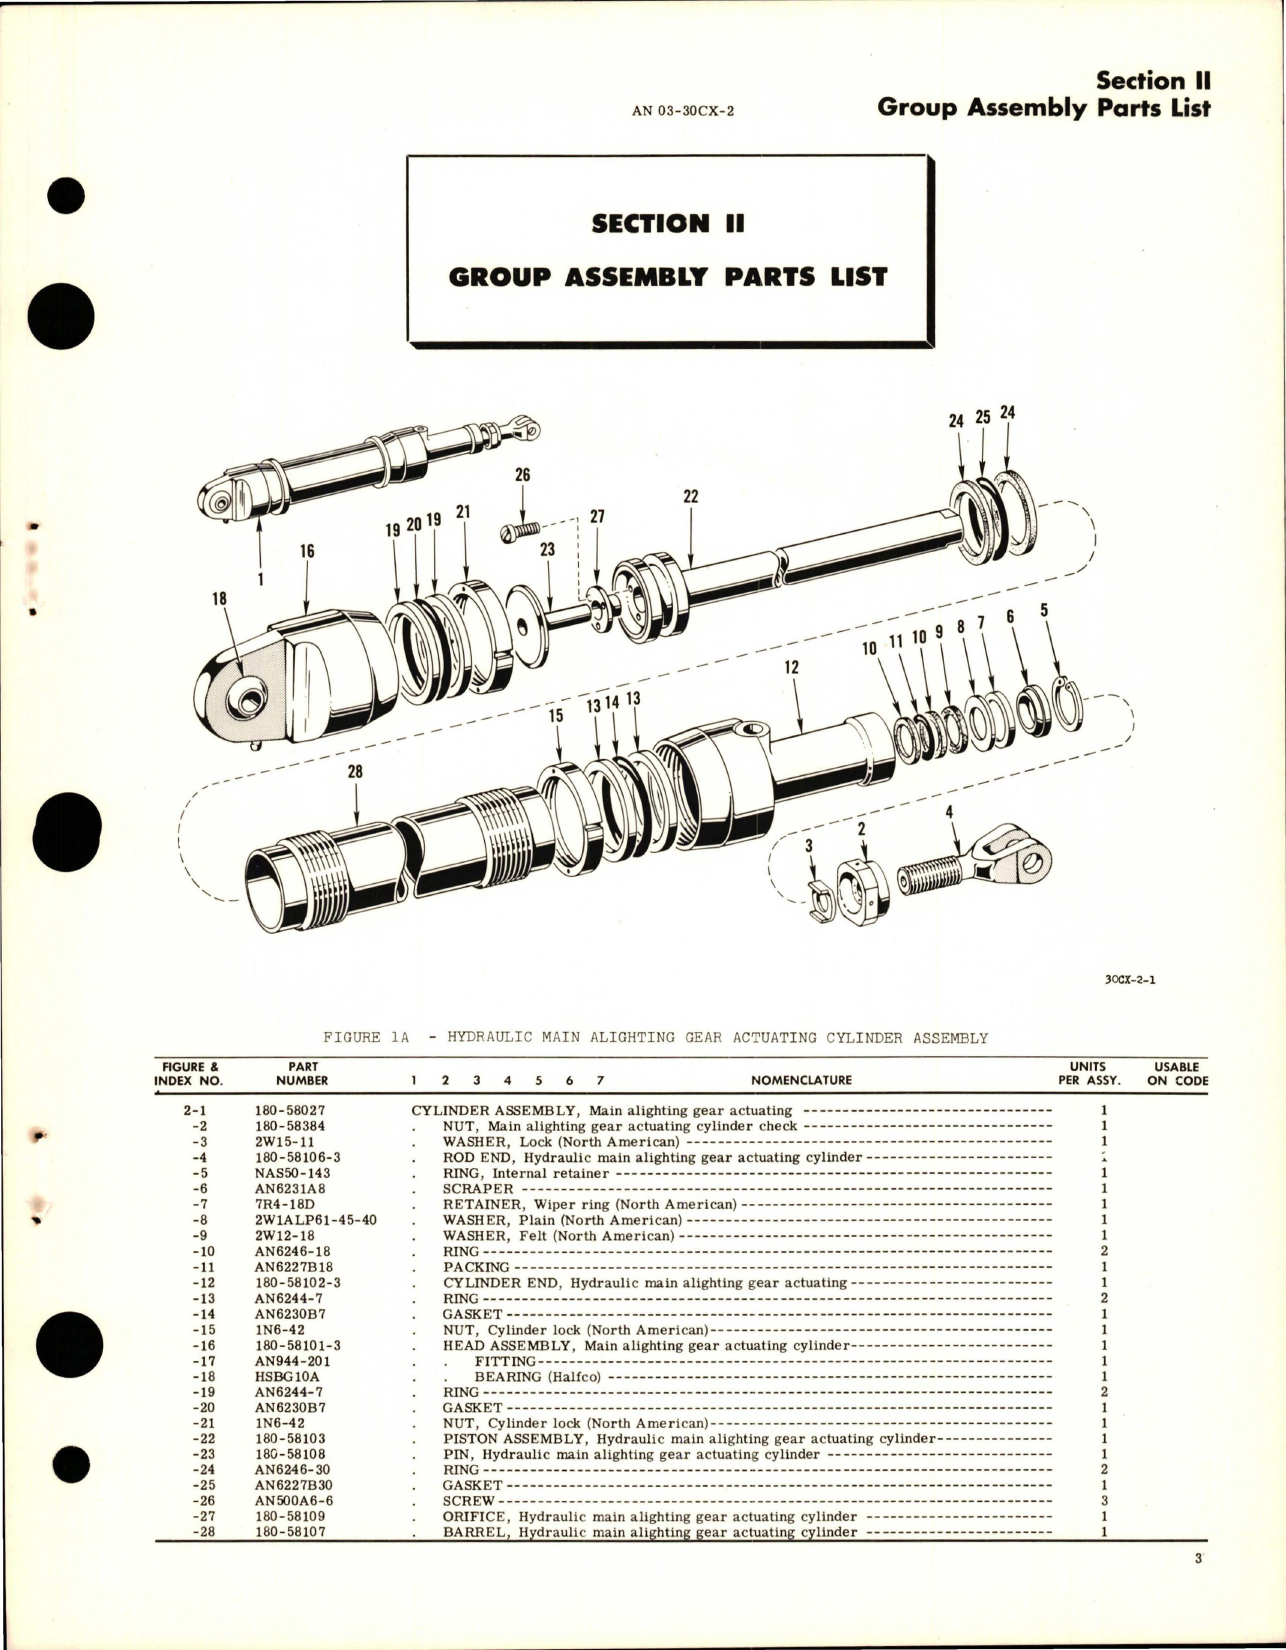 Sample page 7 from AirCorps Library document: Illustrated Parts Breakdown for Hydraulic Actuating Cylinders 